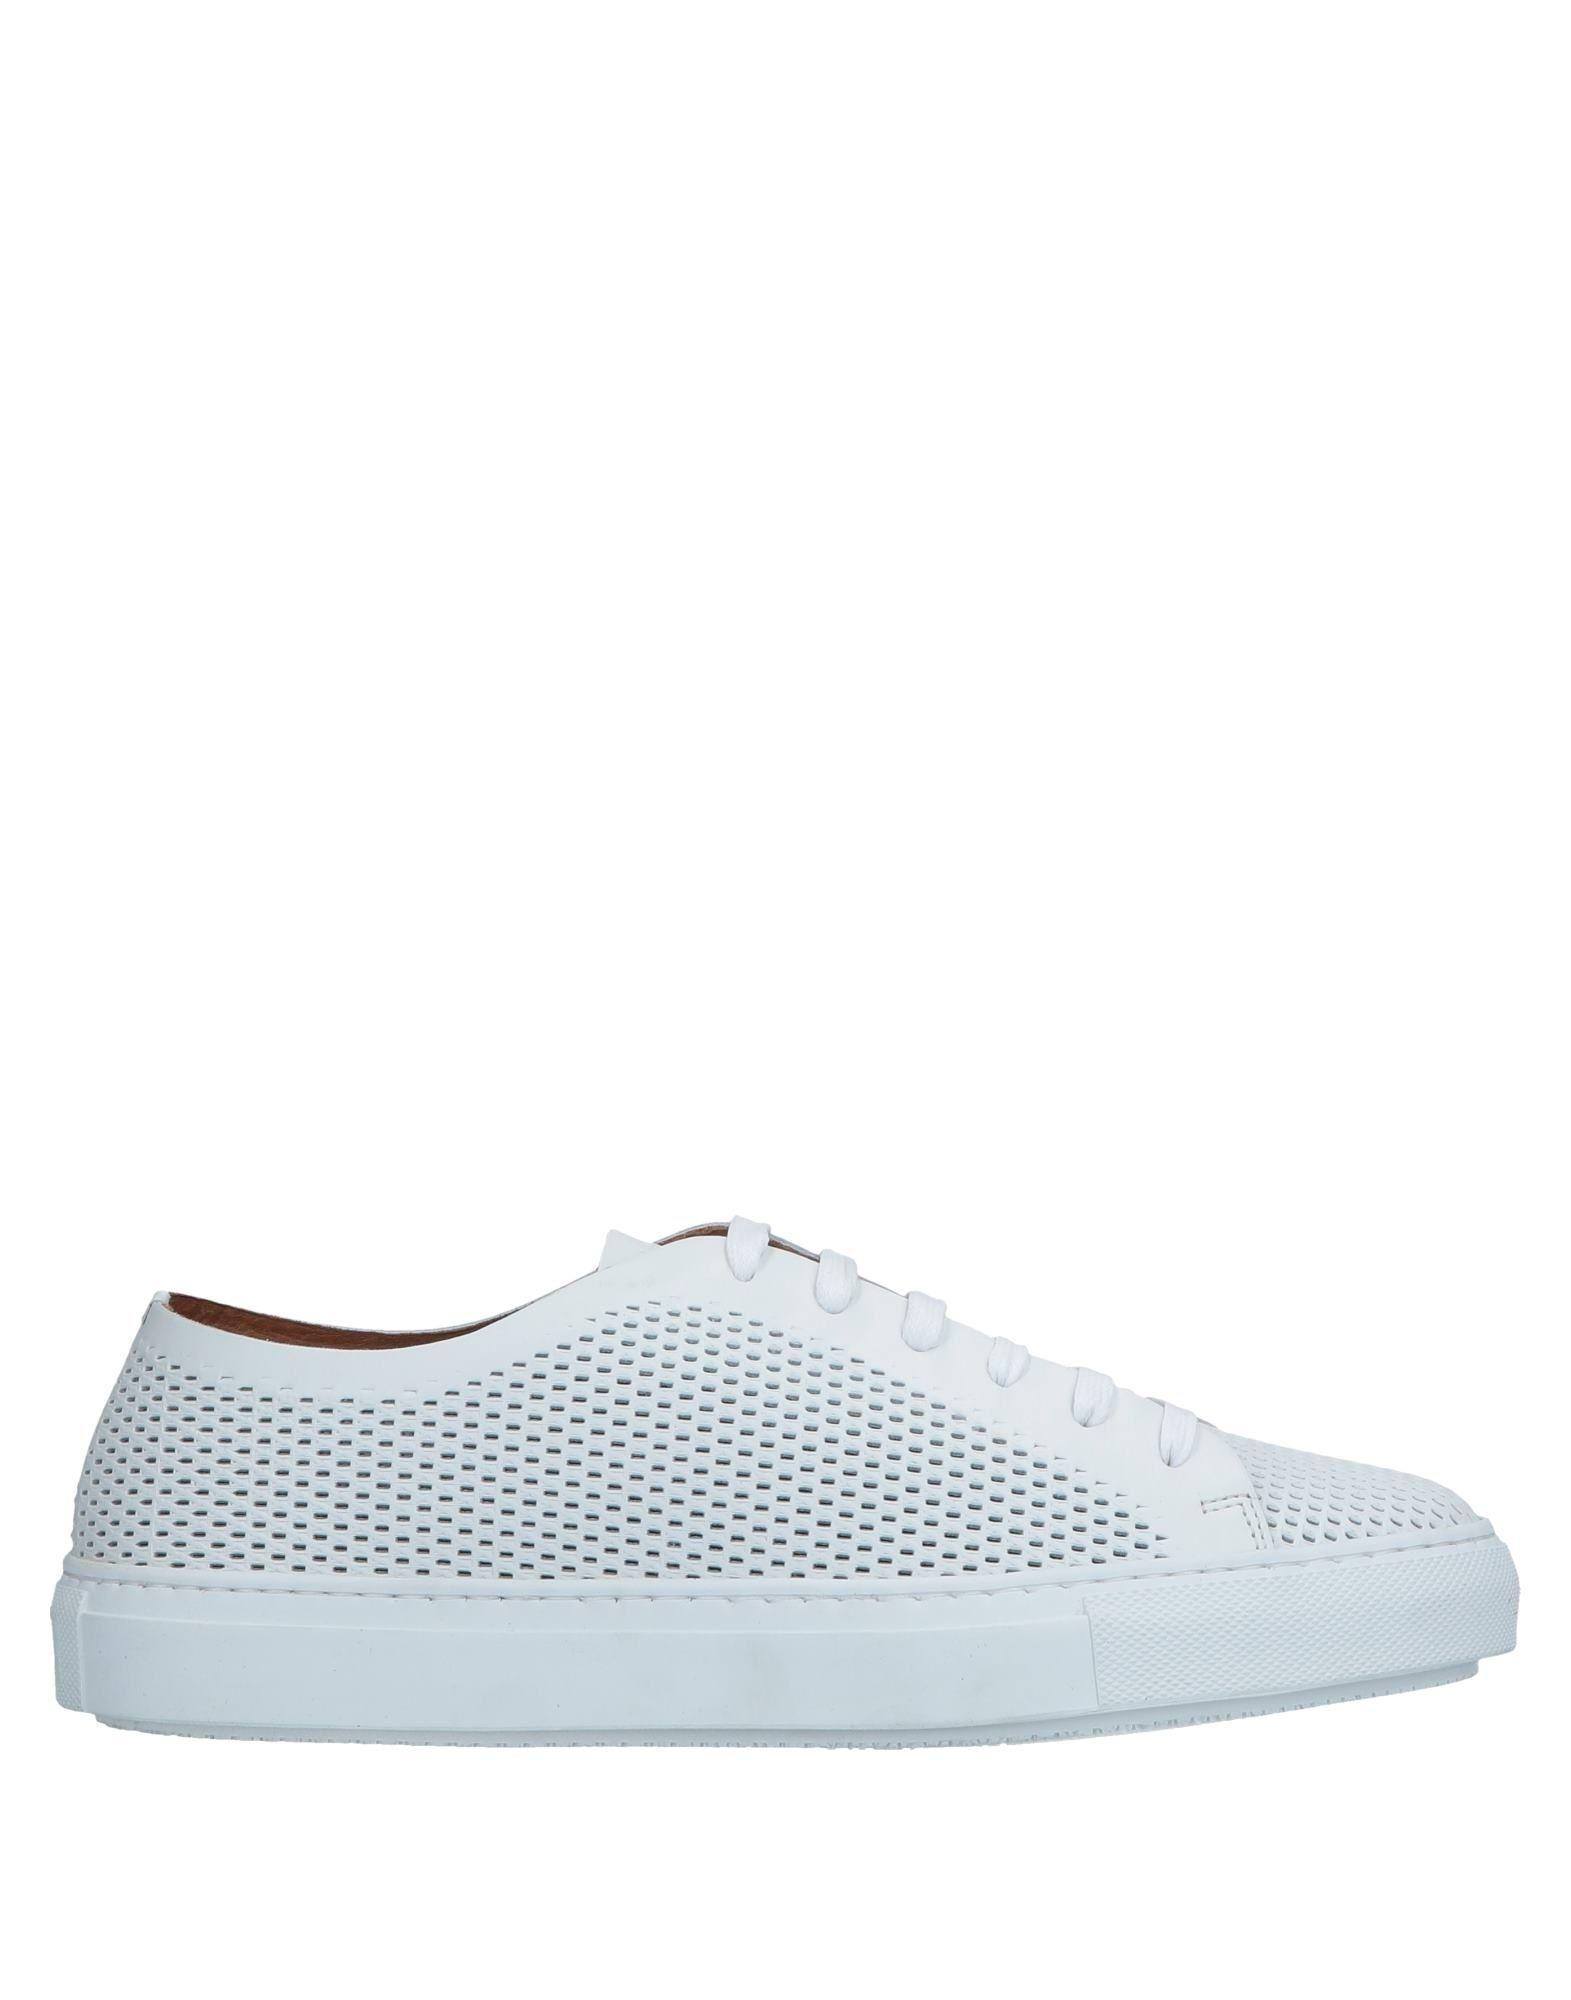 Fratelli Rossetti Leather Low-tops & Sneakers in White for Men - Lyst